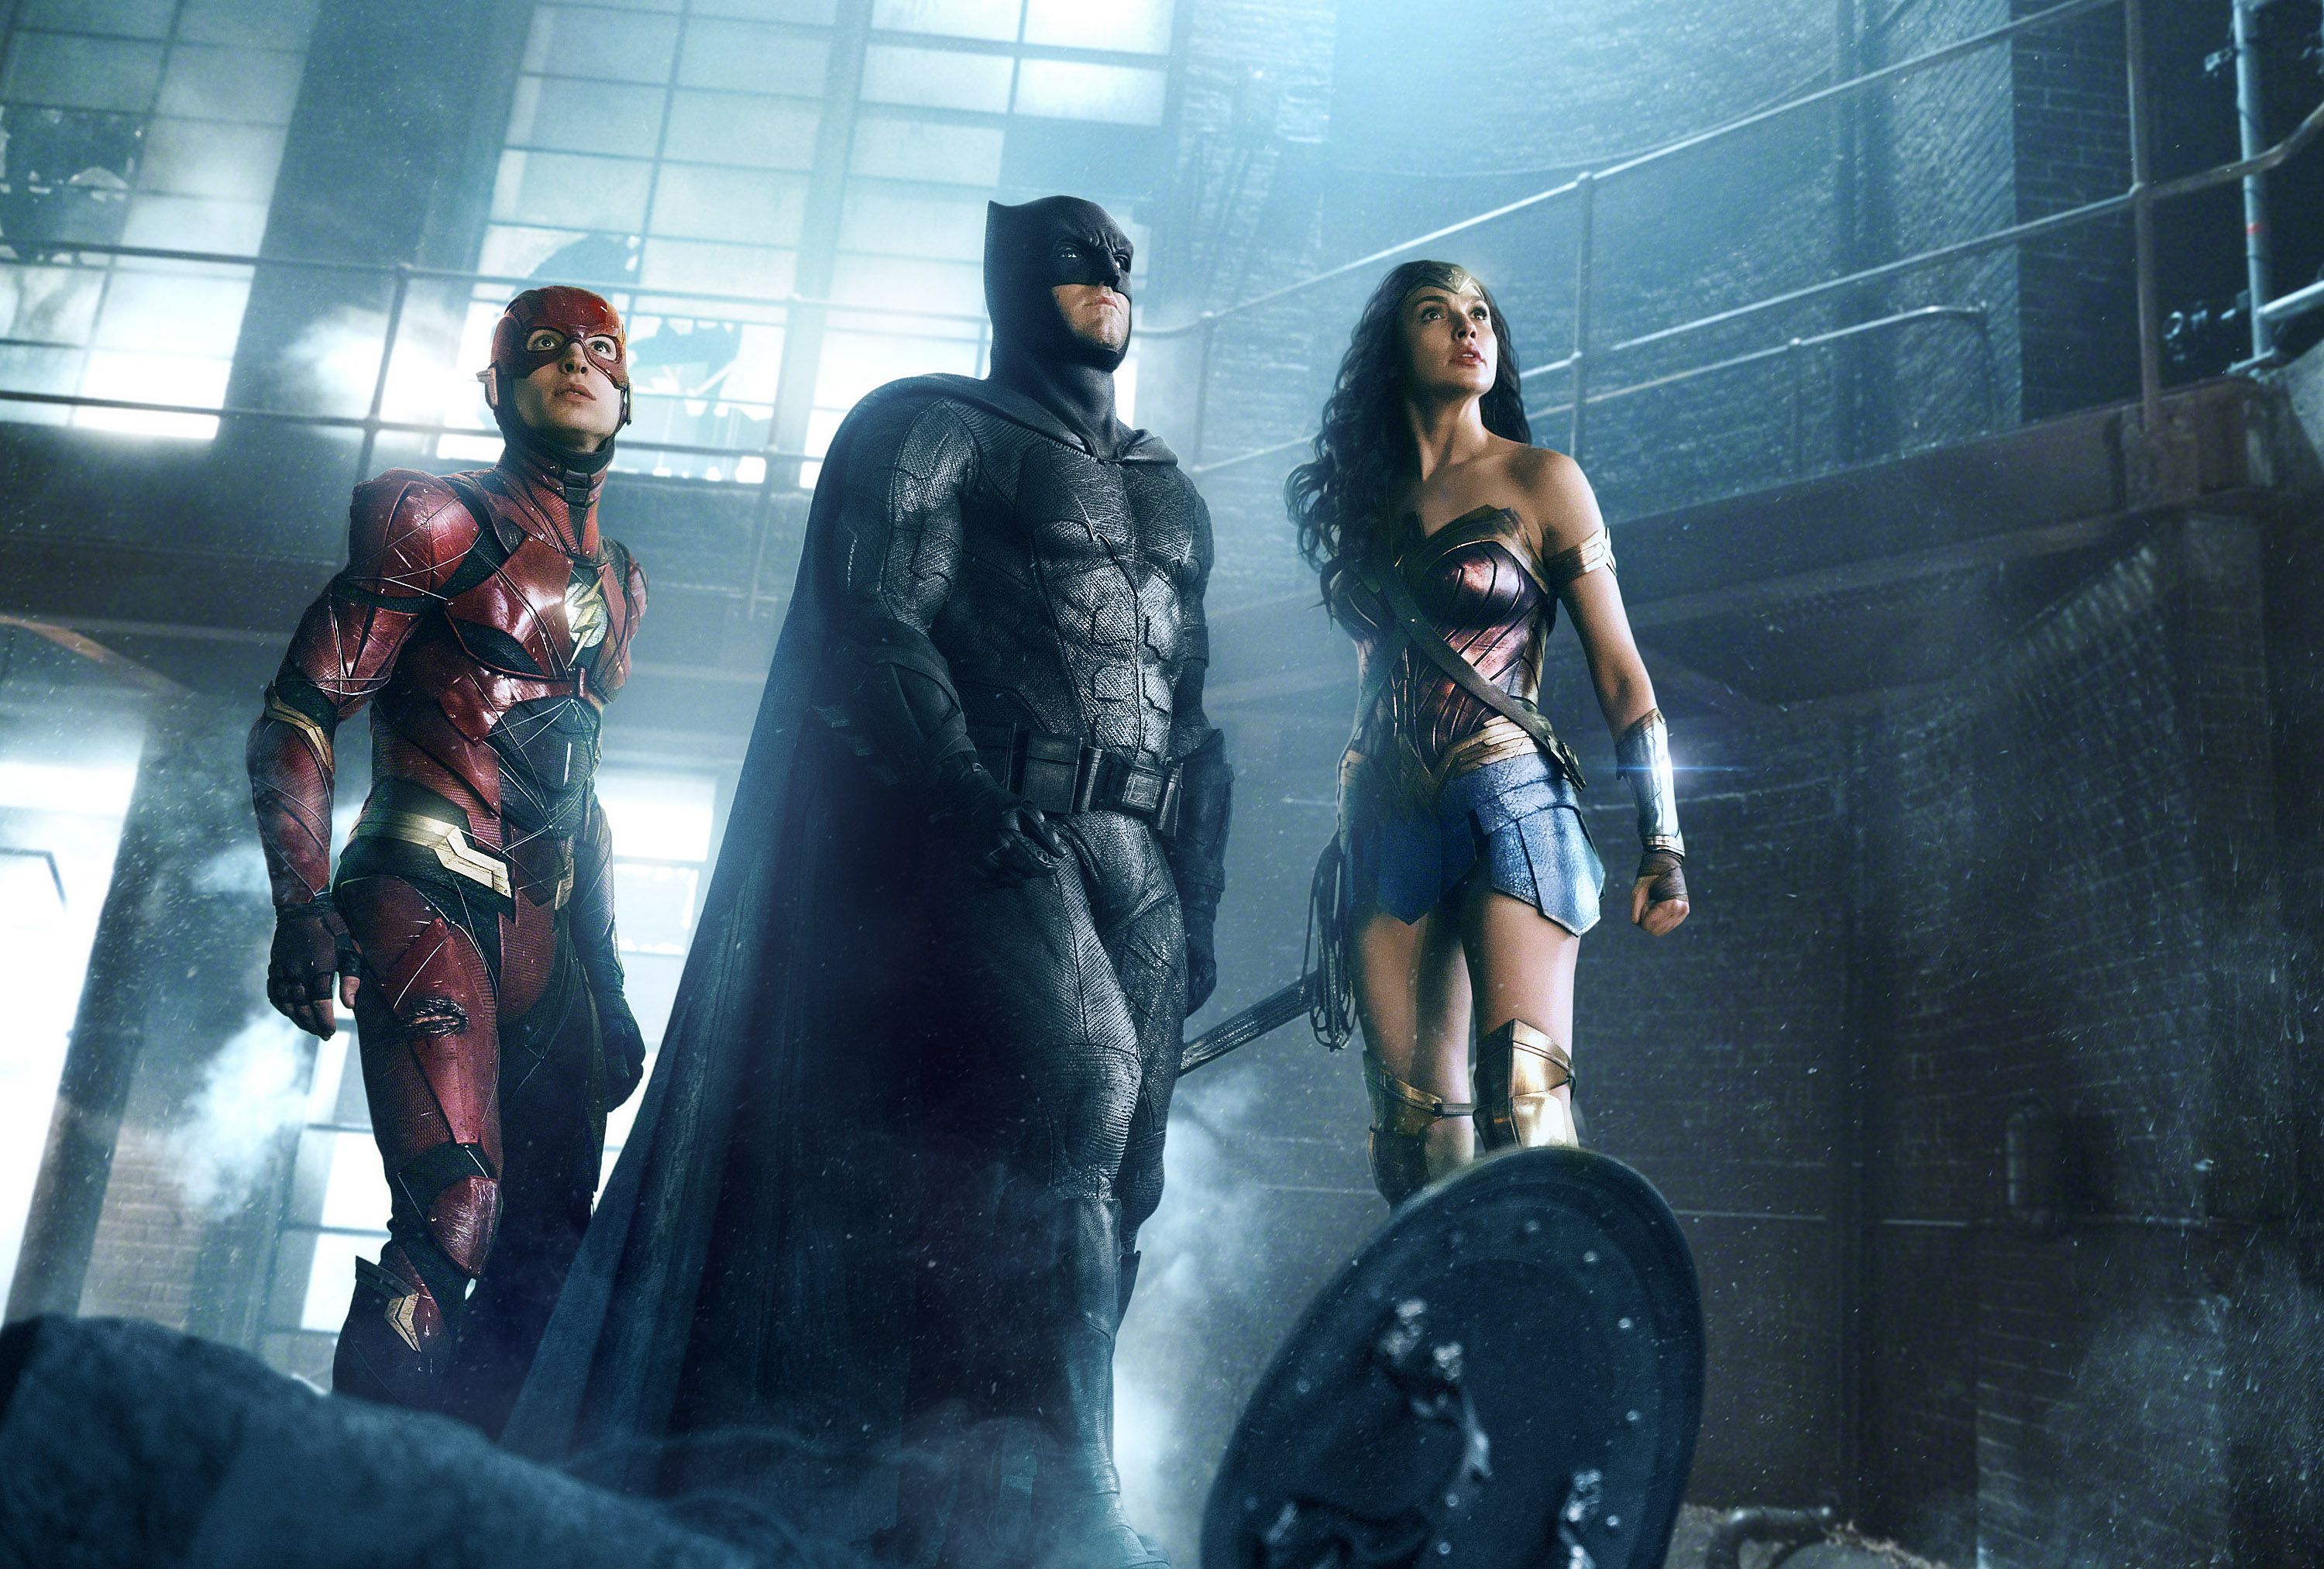 Justice League Movie Review - Justice League is a Disaster Befitting of 2017